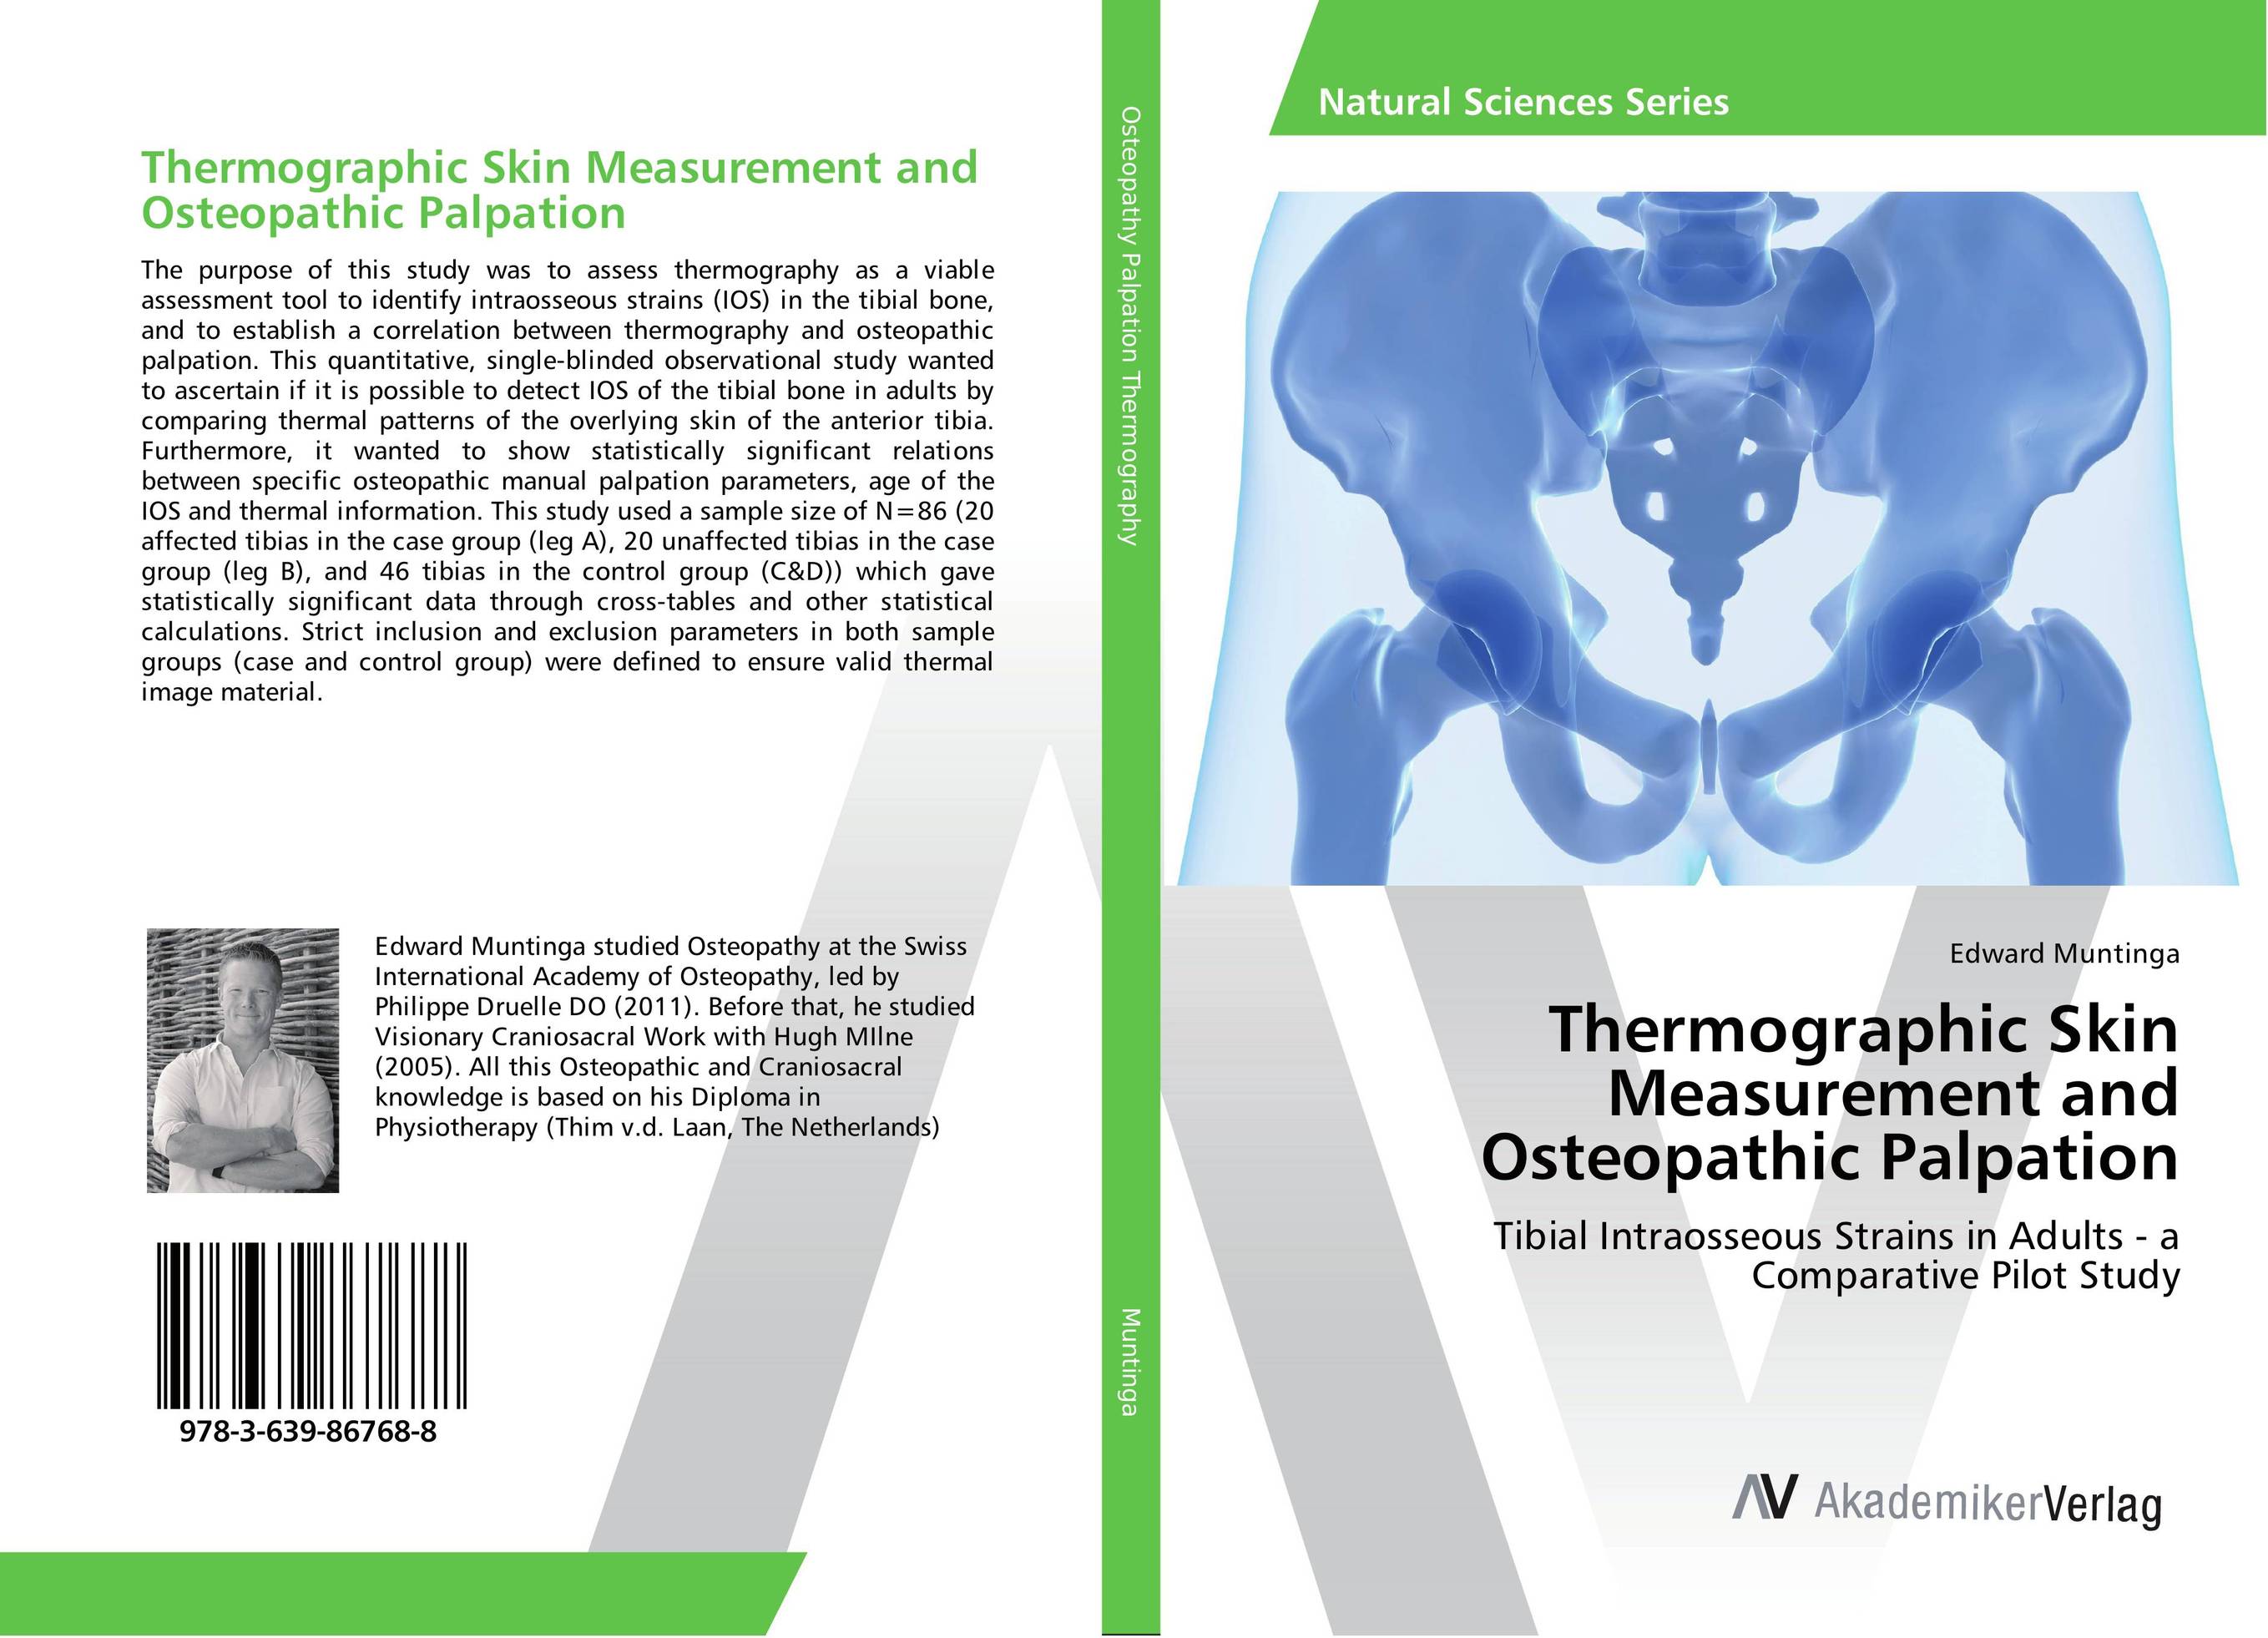 Thermographic Skin Measurement and Osteopathic Palpation